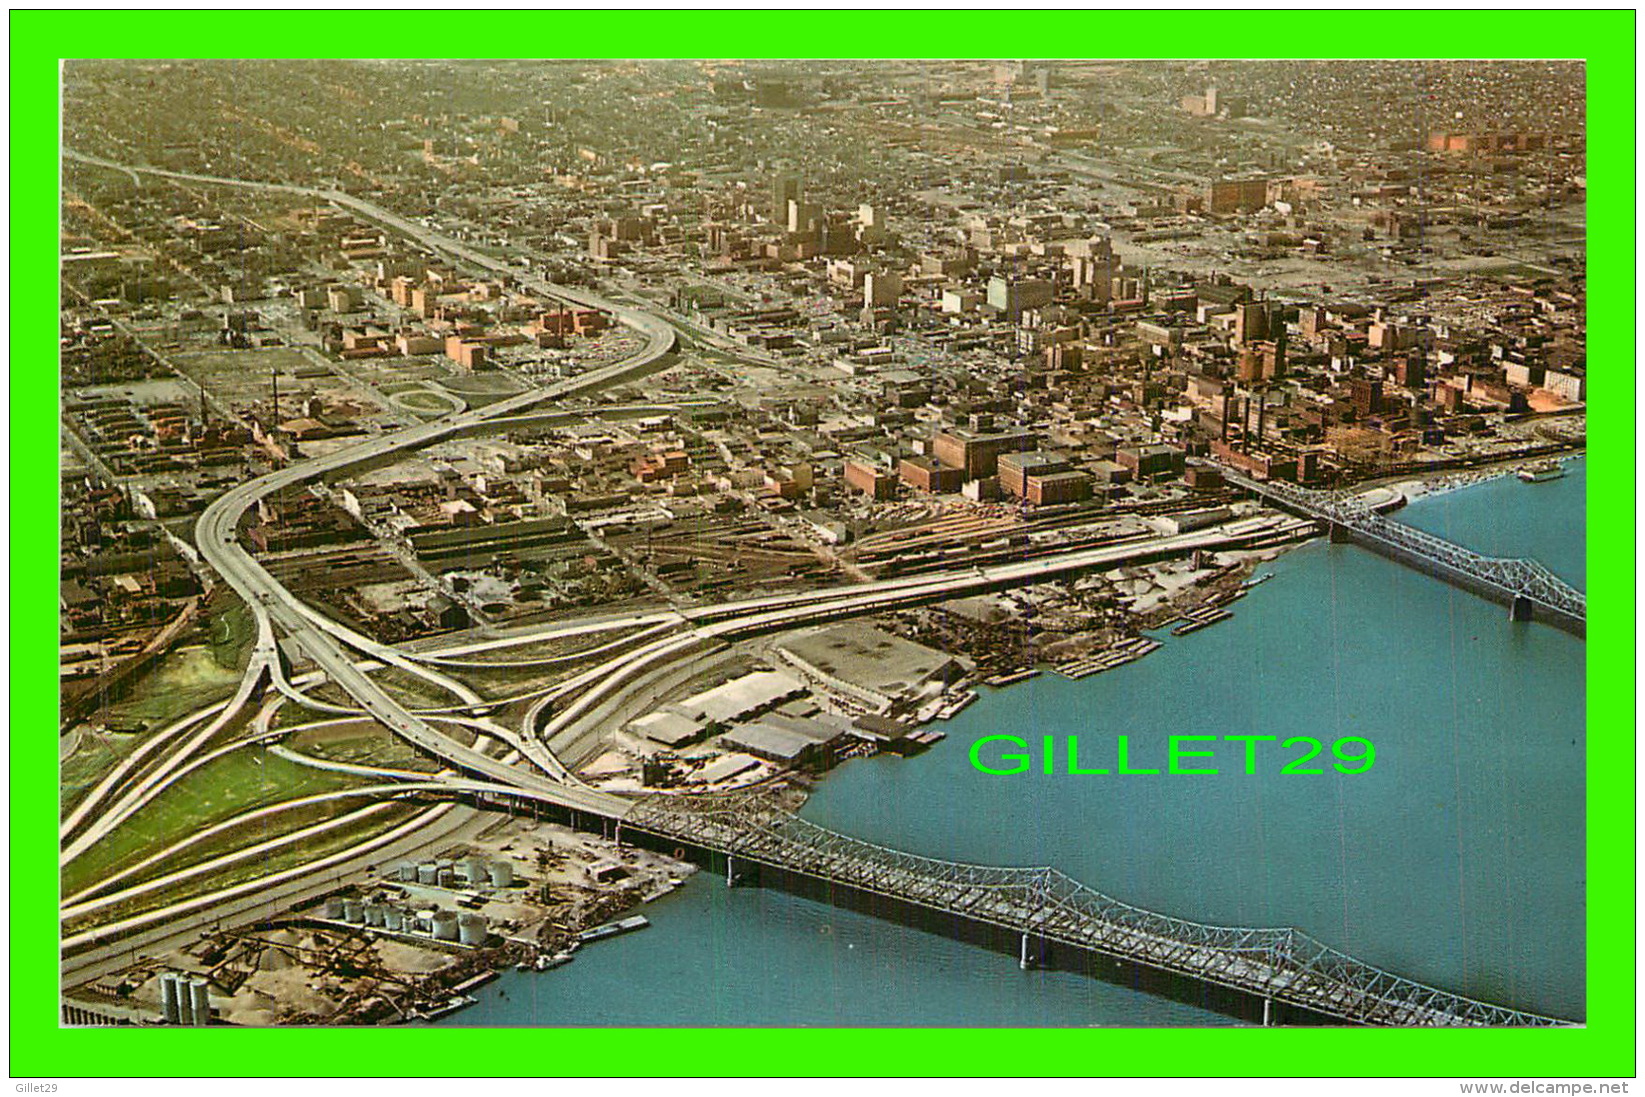 LOUISVILLE, KY - AIRVIEW, OHIO RIVER &amp; KENNEDY MEMORIAL BRIDGE - READMORE DISTRIBUTING CO - - Louisville